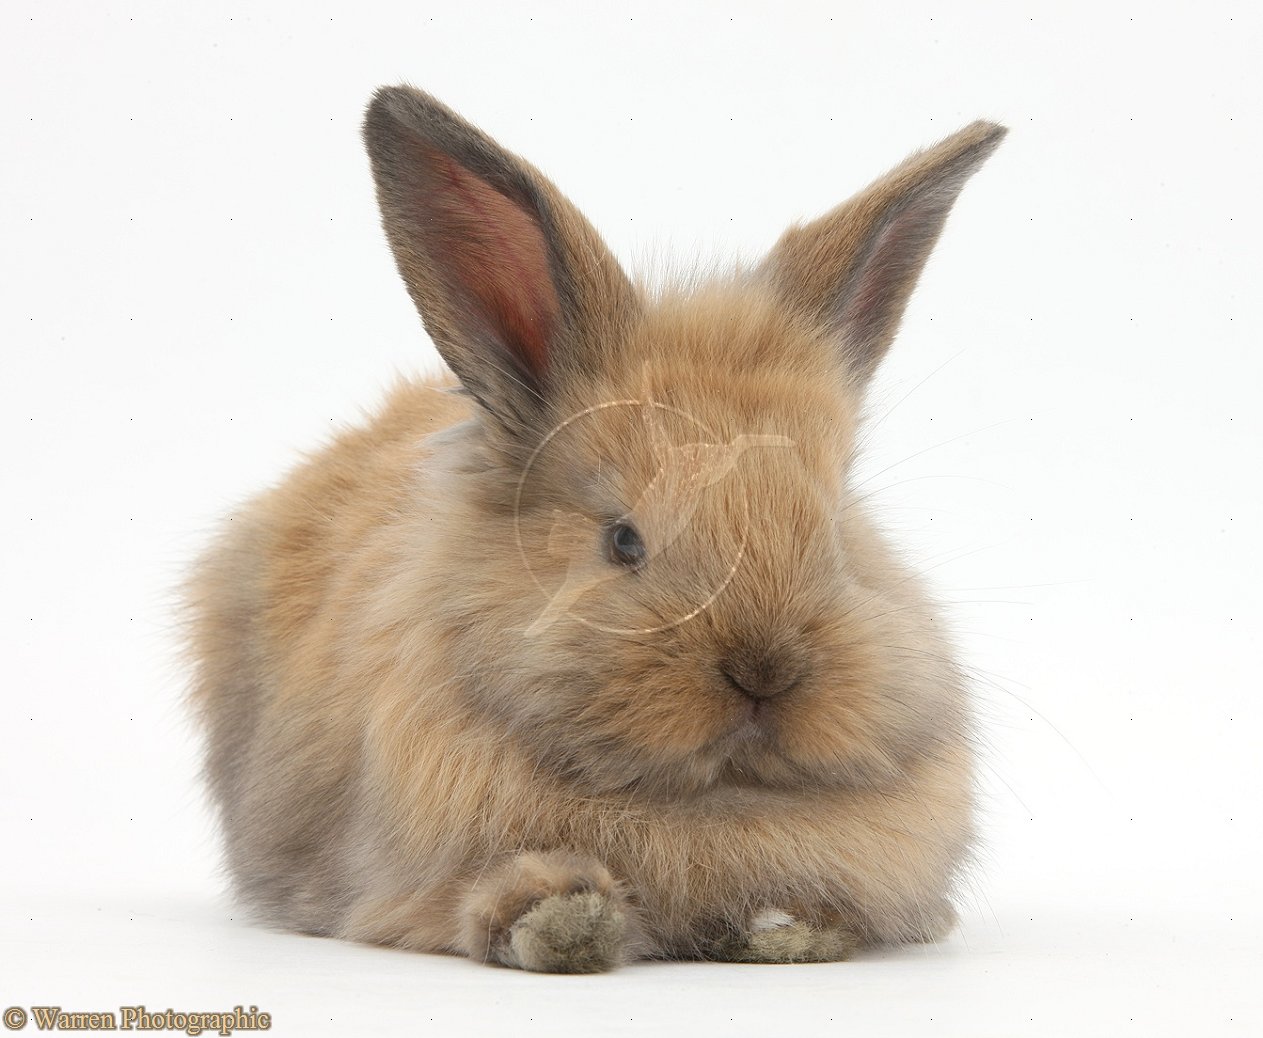 Cute Baby Bunnies 9322 Hd Wallpapers in Animals   Imagescicom